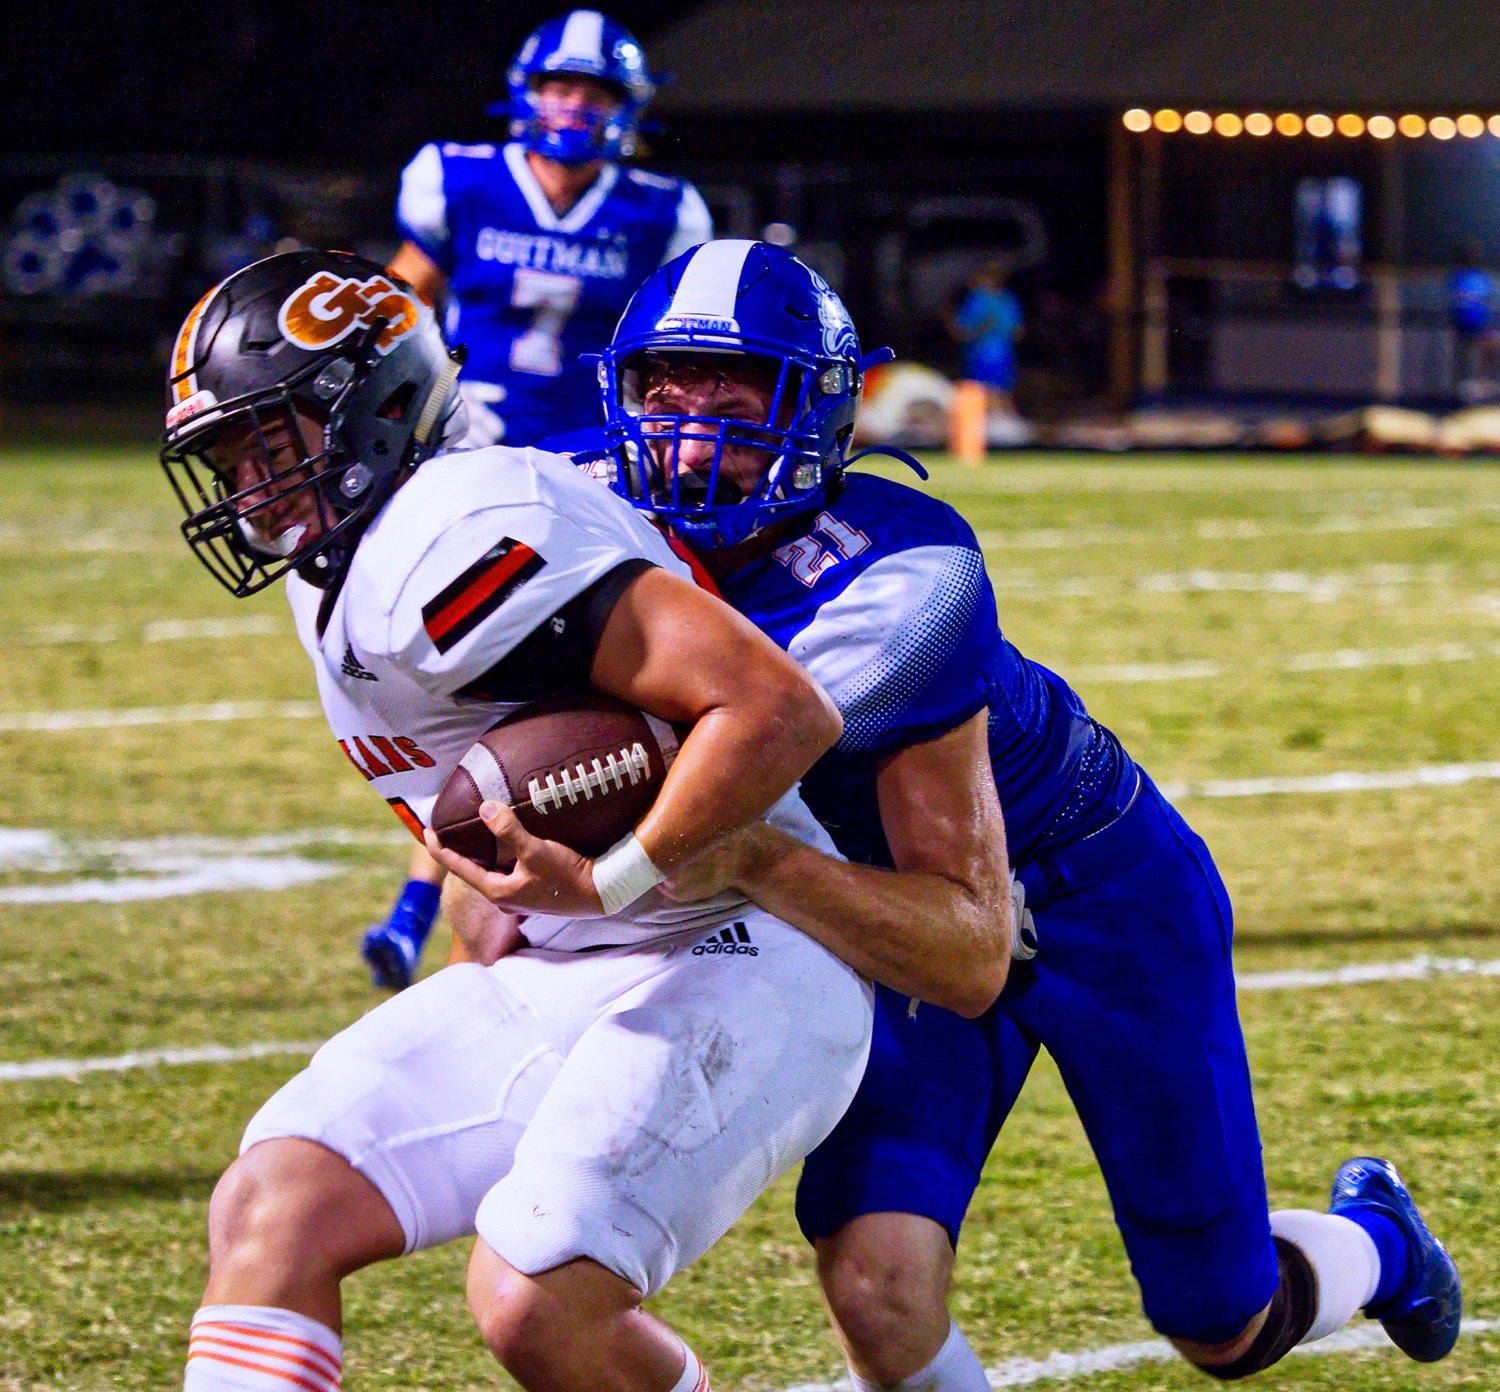 Cason Johnson forces the Indian ballcarrier to the boundary. [find more football photos]